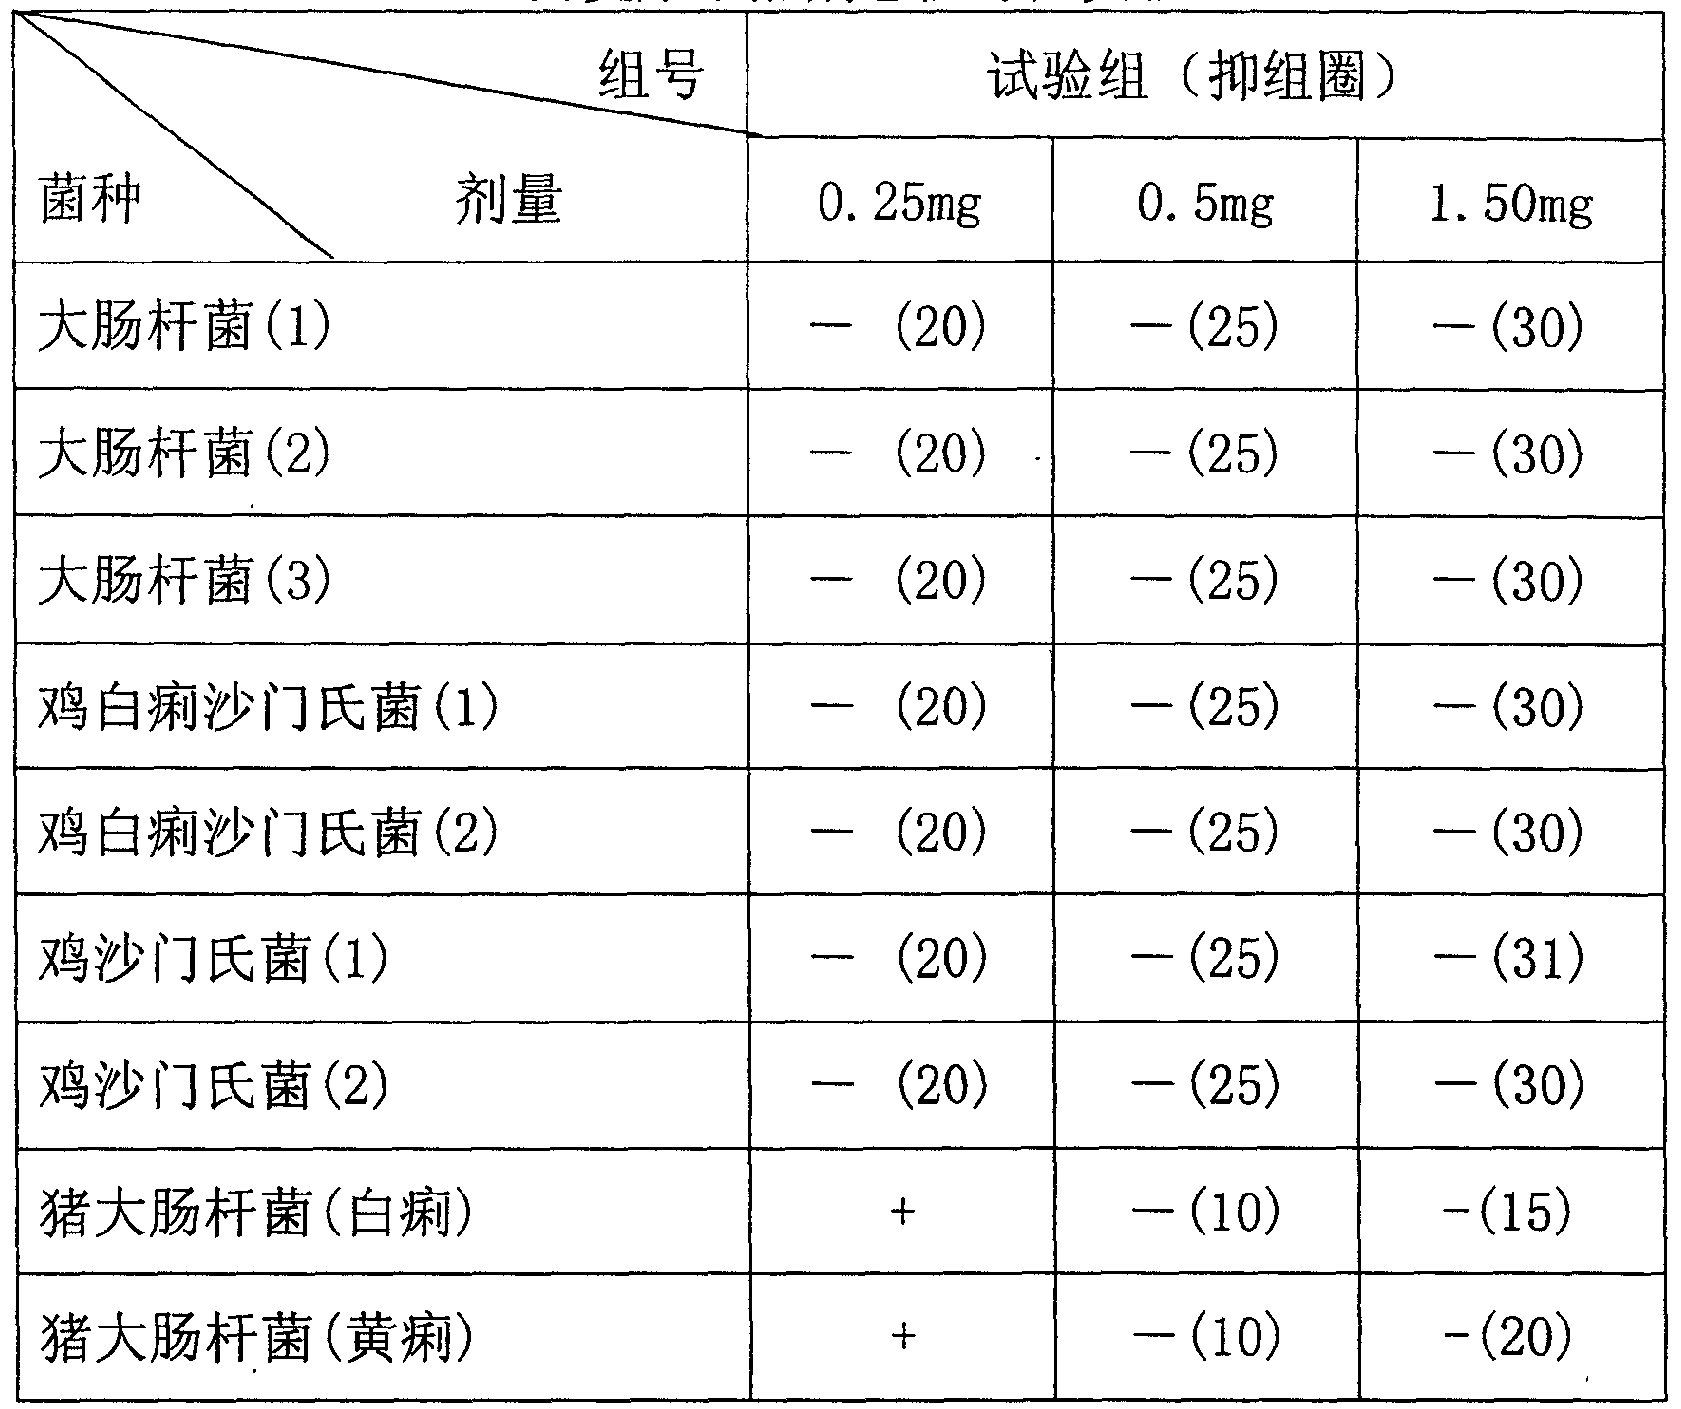 Composite traditional Chinese herb formulation for preventing and treating gastrointestinal disease for fowl and livestock, and its preparation method and uses